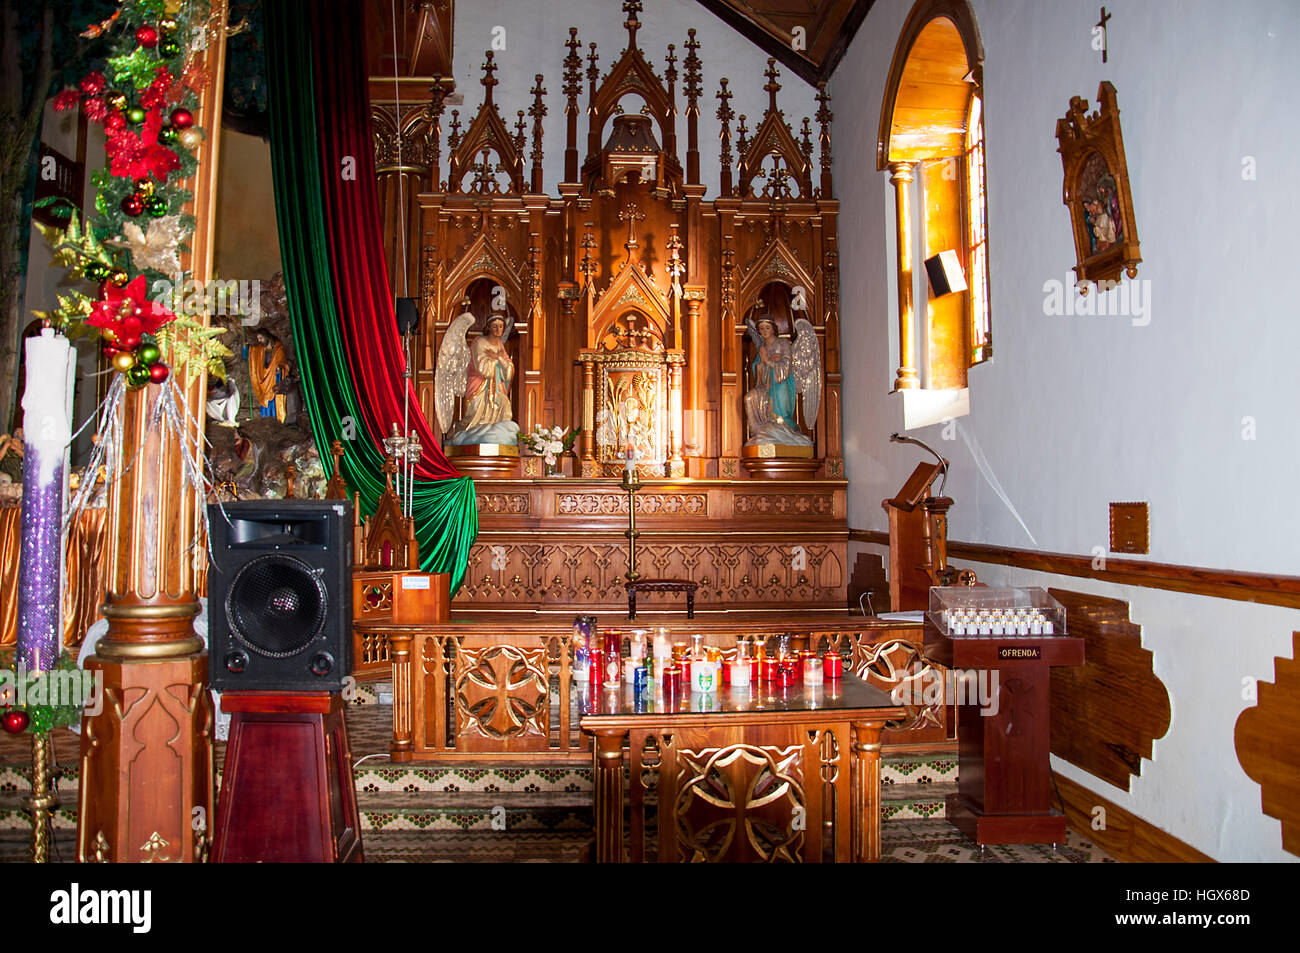 interior images of Church of Our Lady Carmen in Guatape, Medellin, Colombia Stock Photo